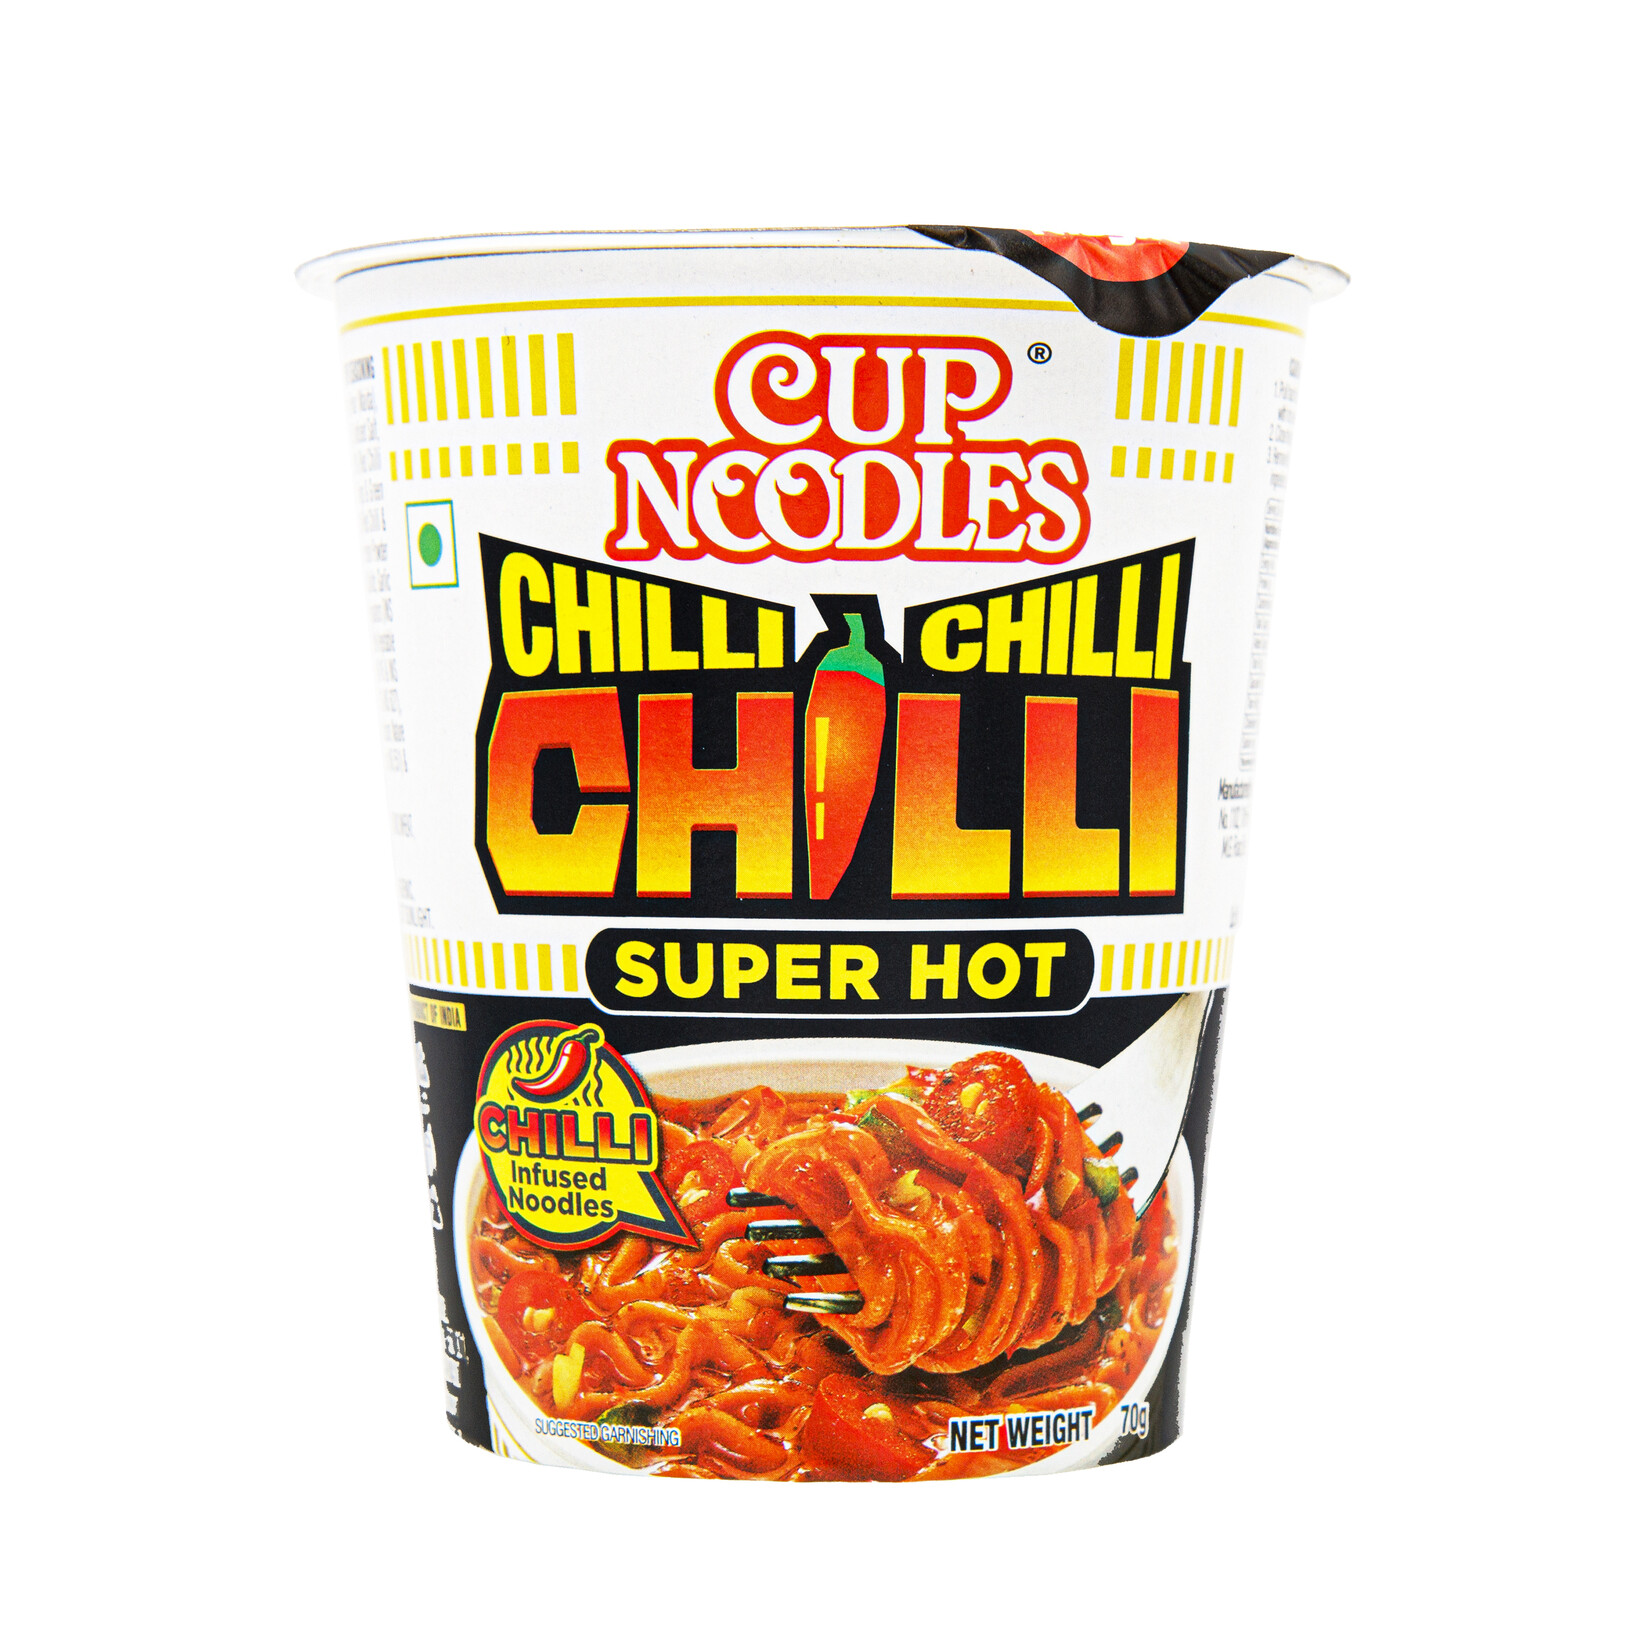 Nissin ouilles chili 70g